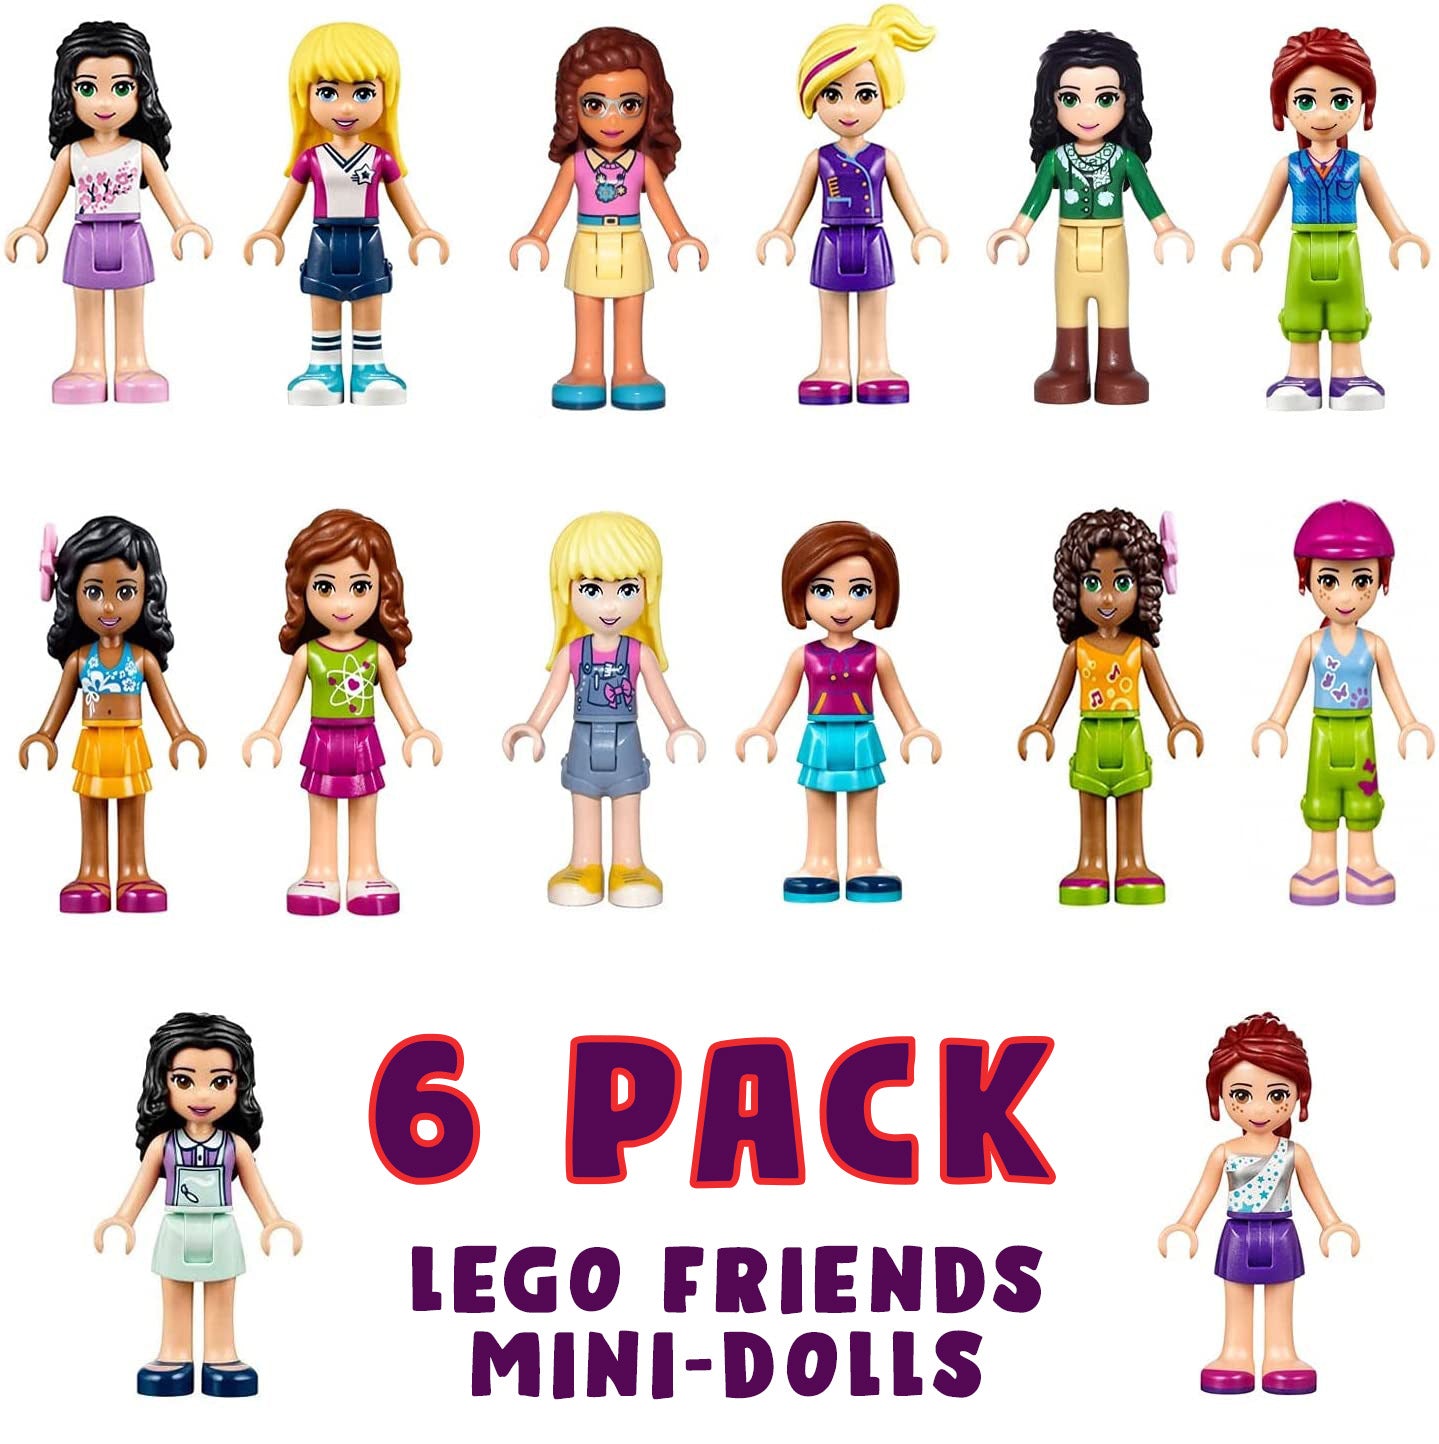 I know Lego friends doesn't always get a lot of love, but it's